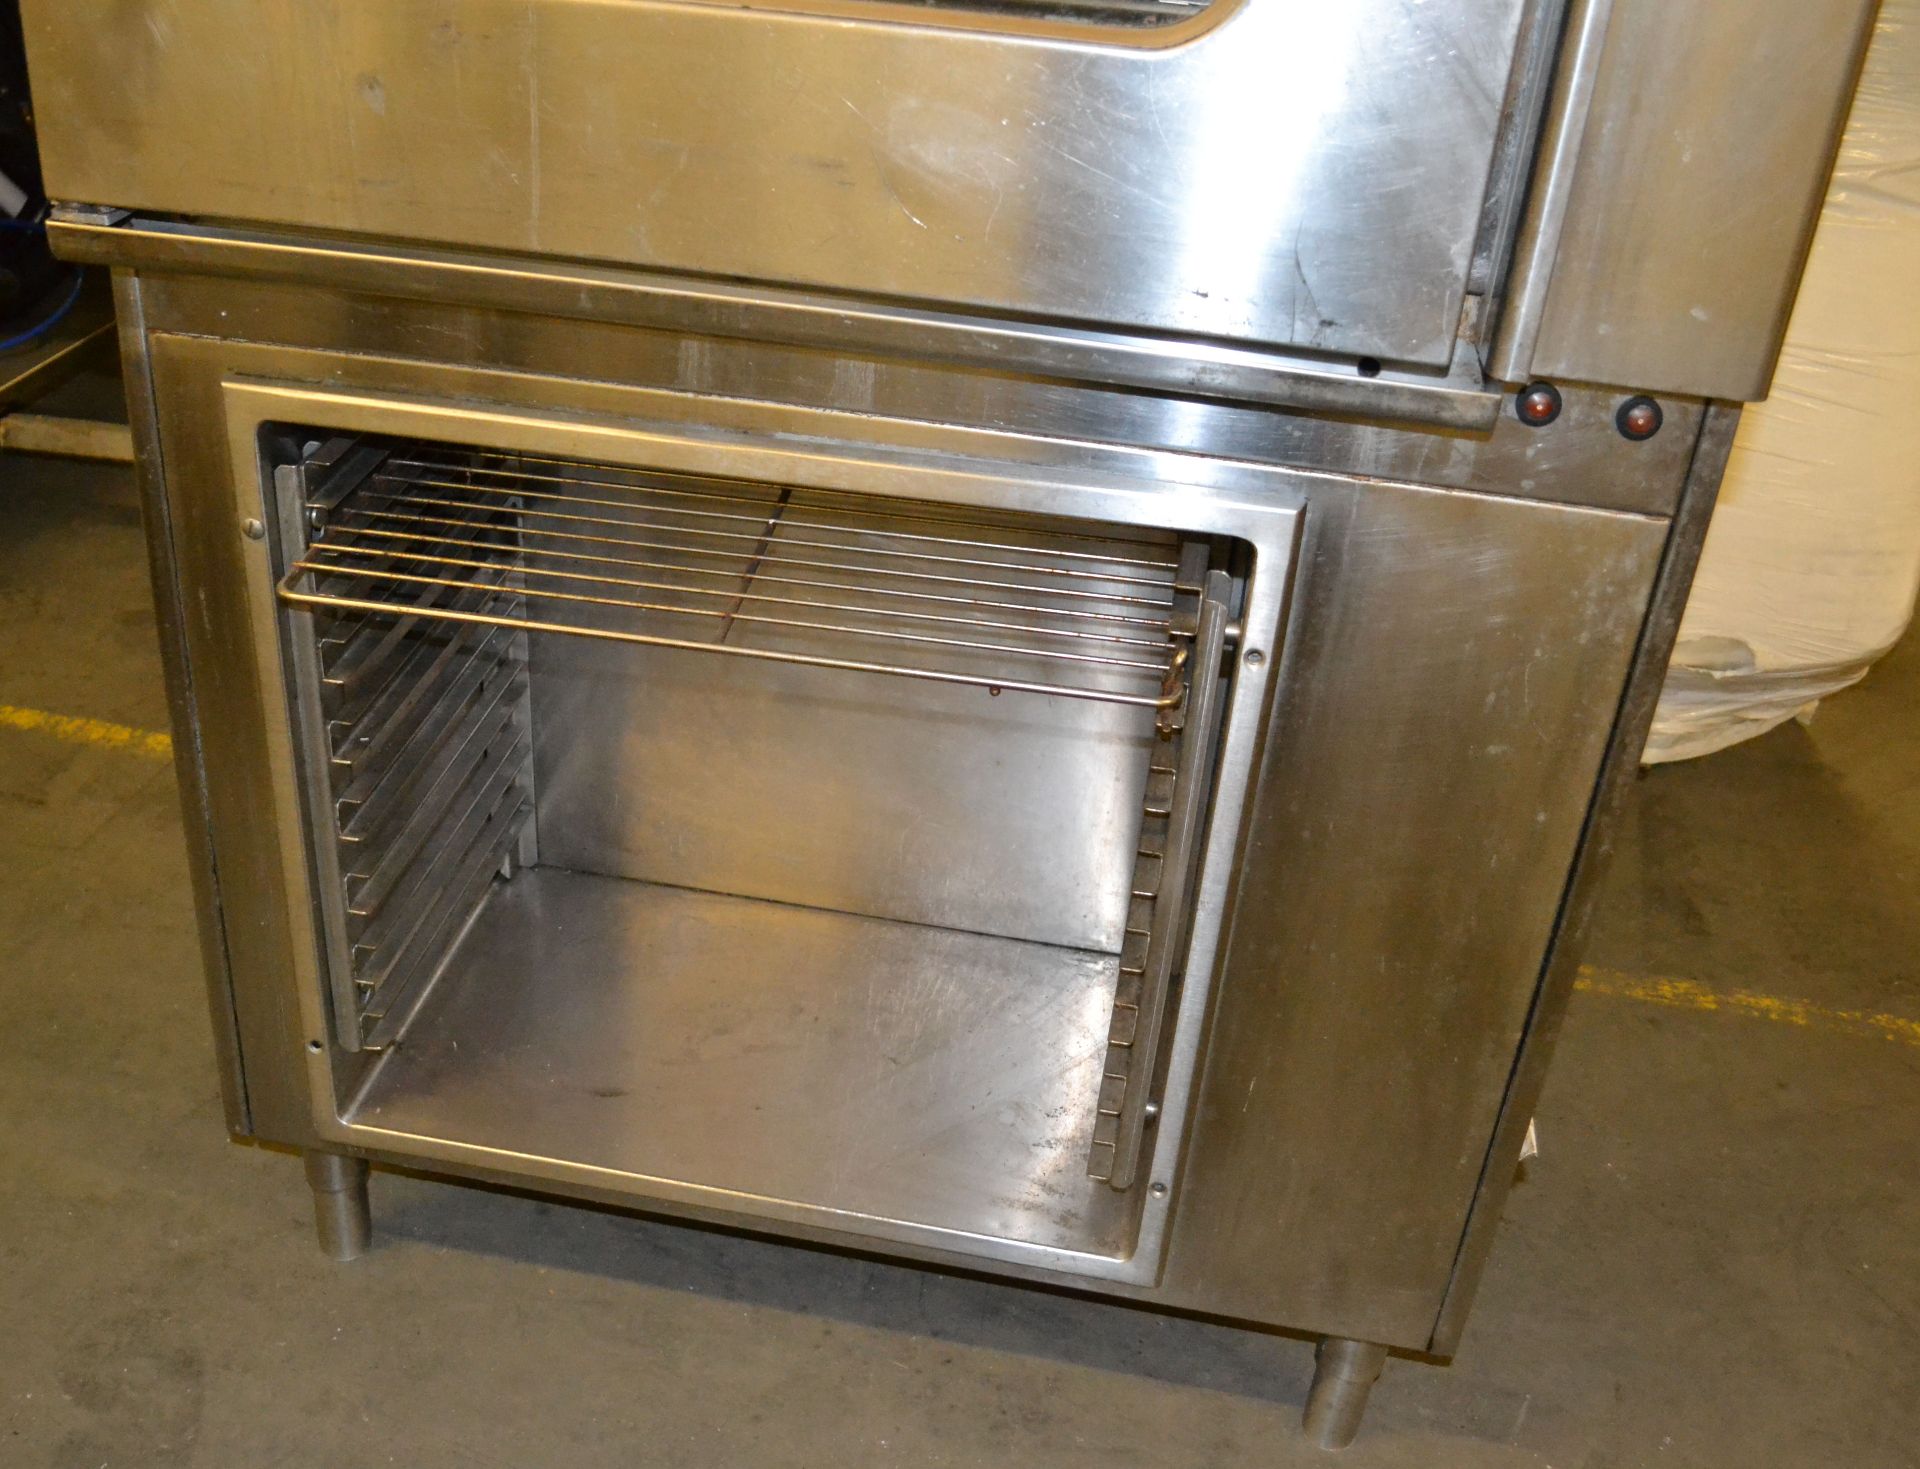 1 x Lainox MG110M LX Type Combination Oven with Pan Capacity - Ref:NCE032 - CL007 - Location: Bolton - Image 10 of 15